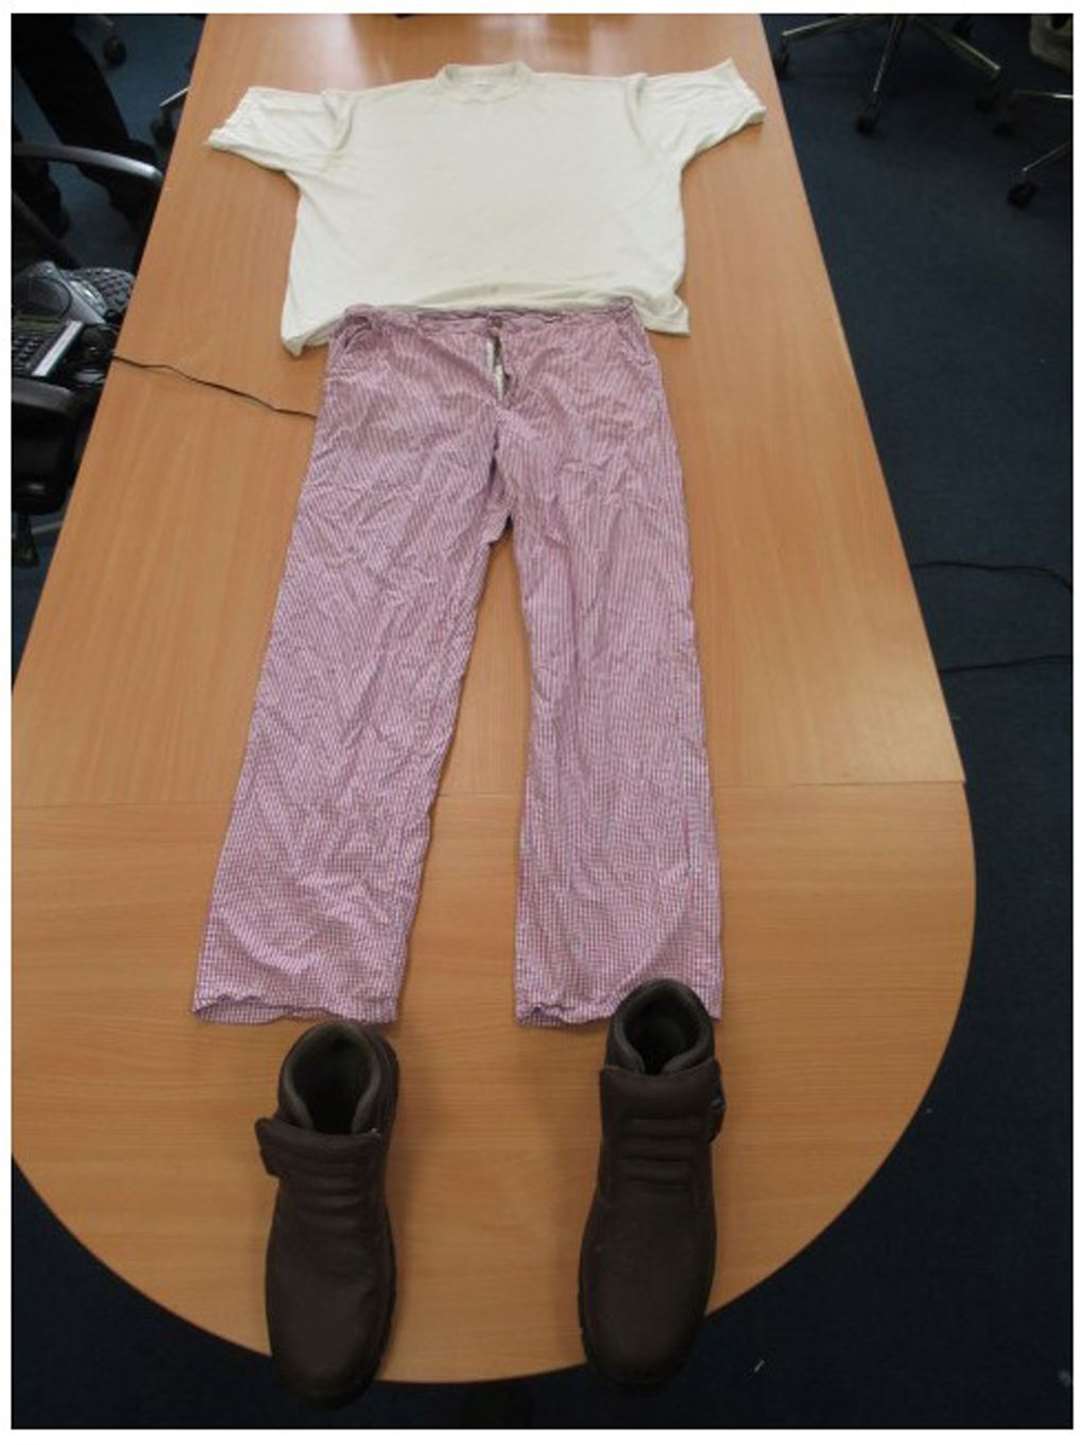 A chef uniform which Khalife was wearing as he escaped HMP Wandsworth (Metropolitan Police/PA)